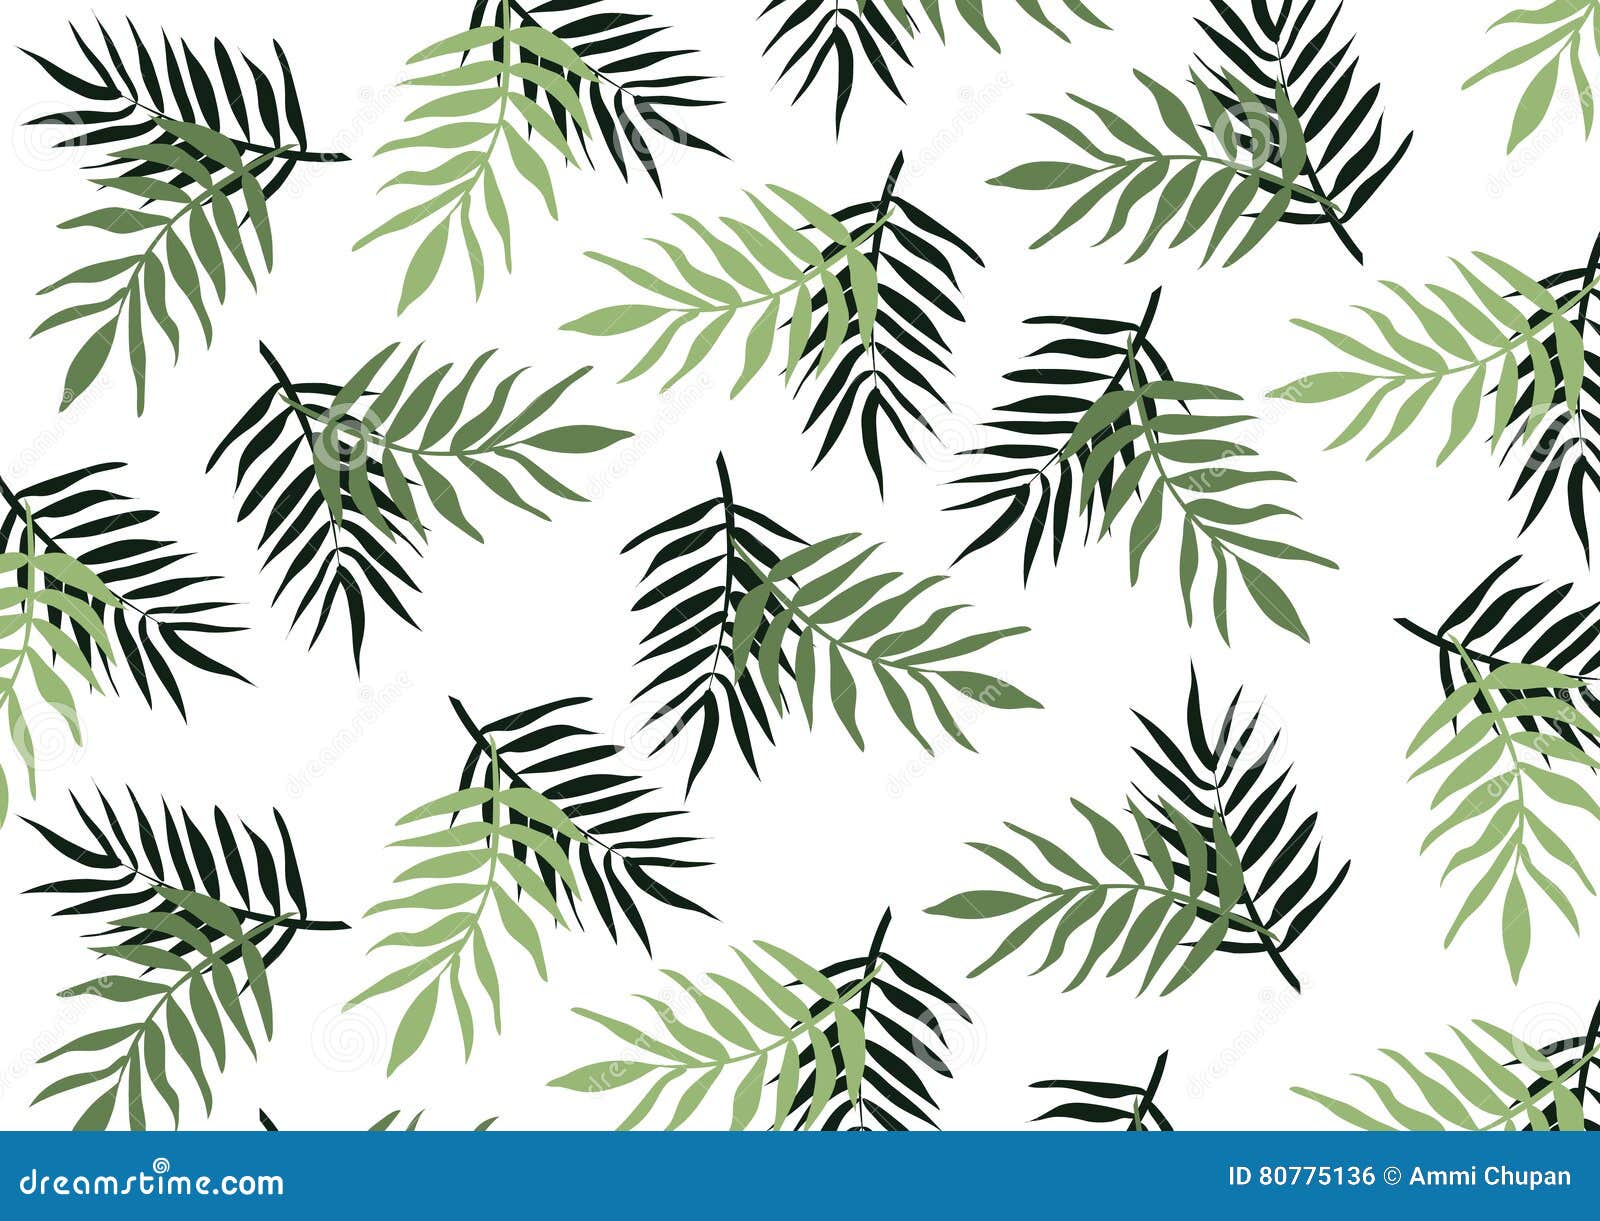 Green Leaves on White Background | Natural Element Wallpaper Backdrop